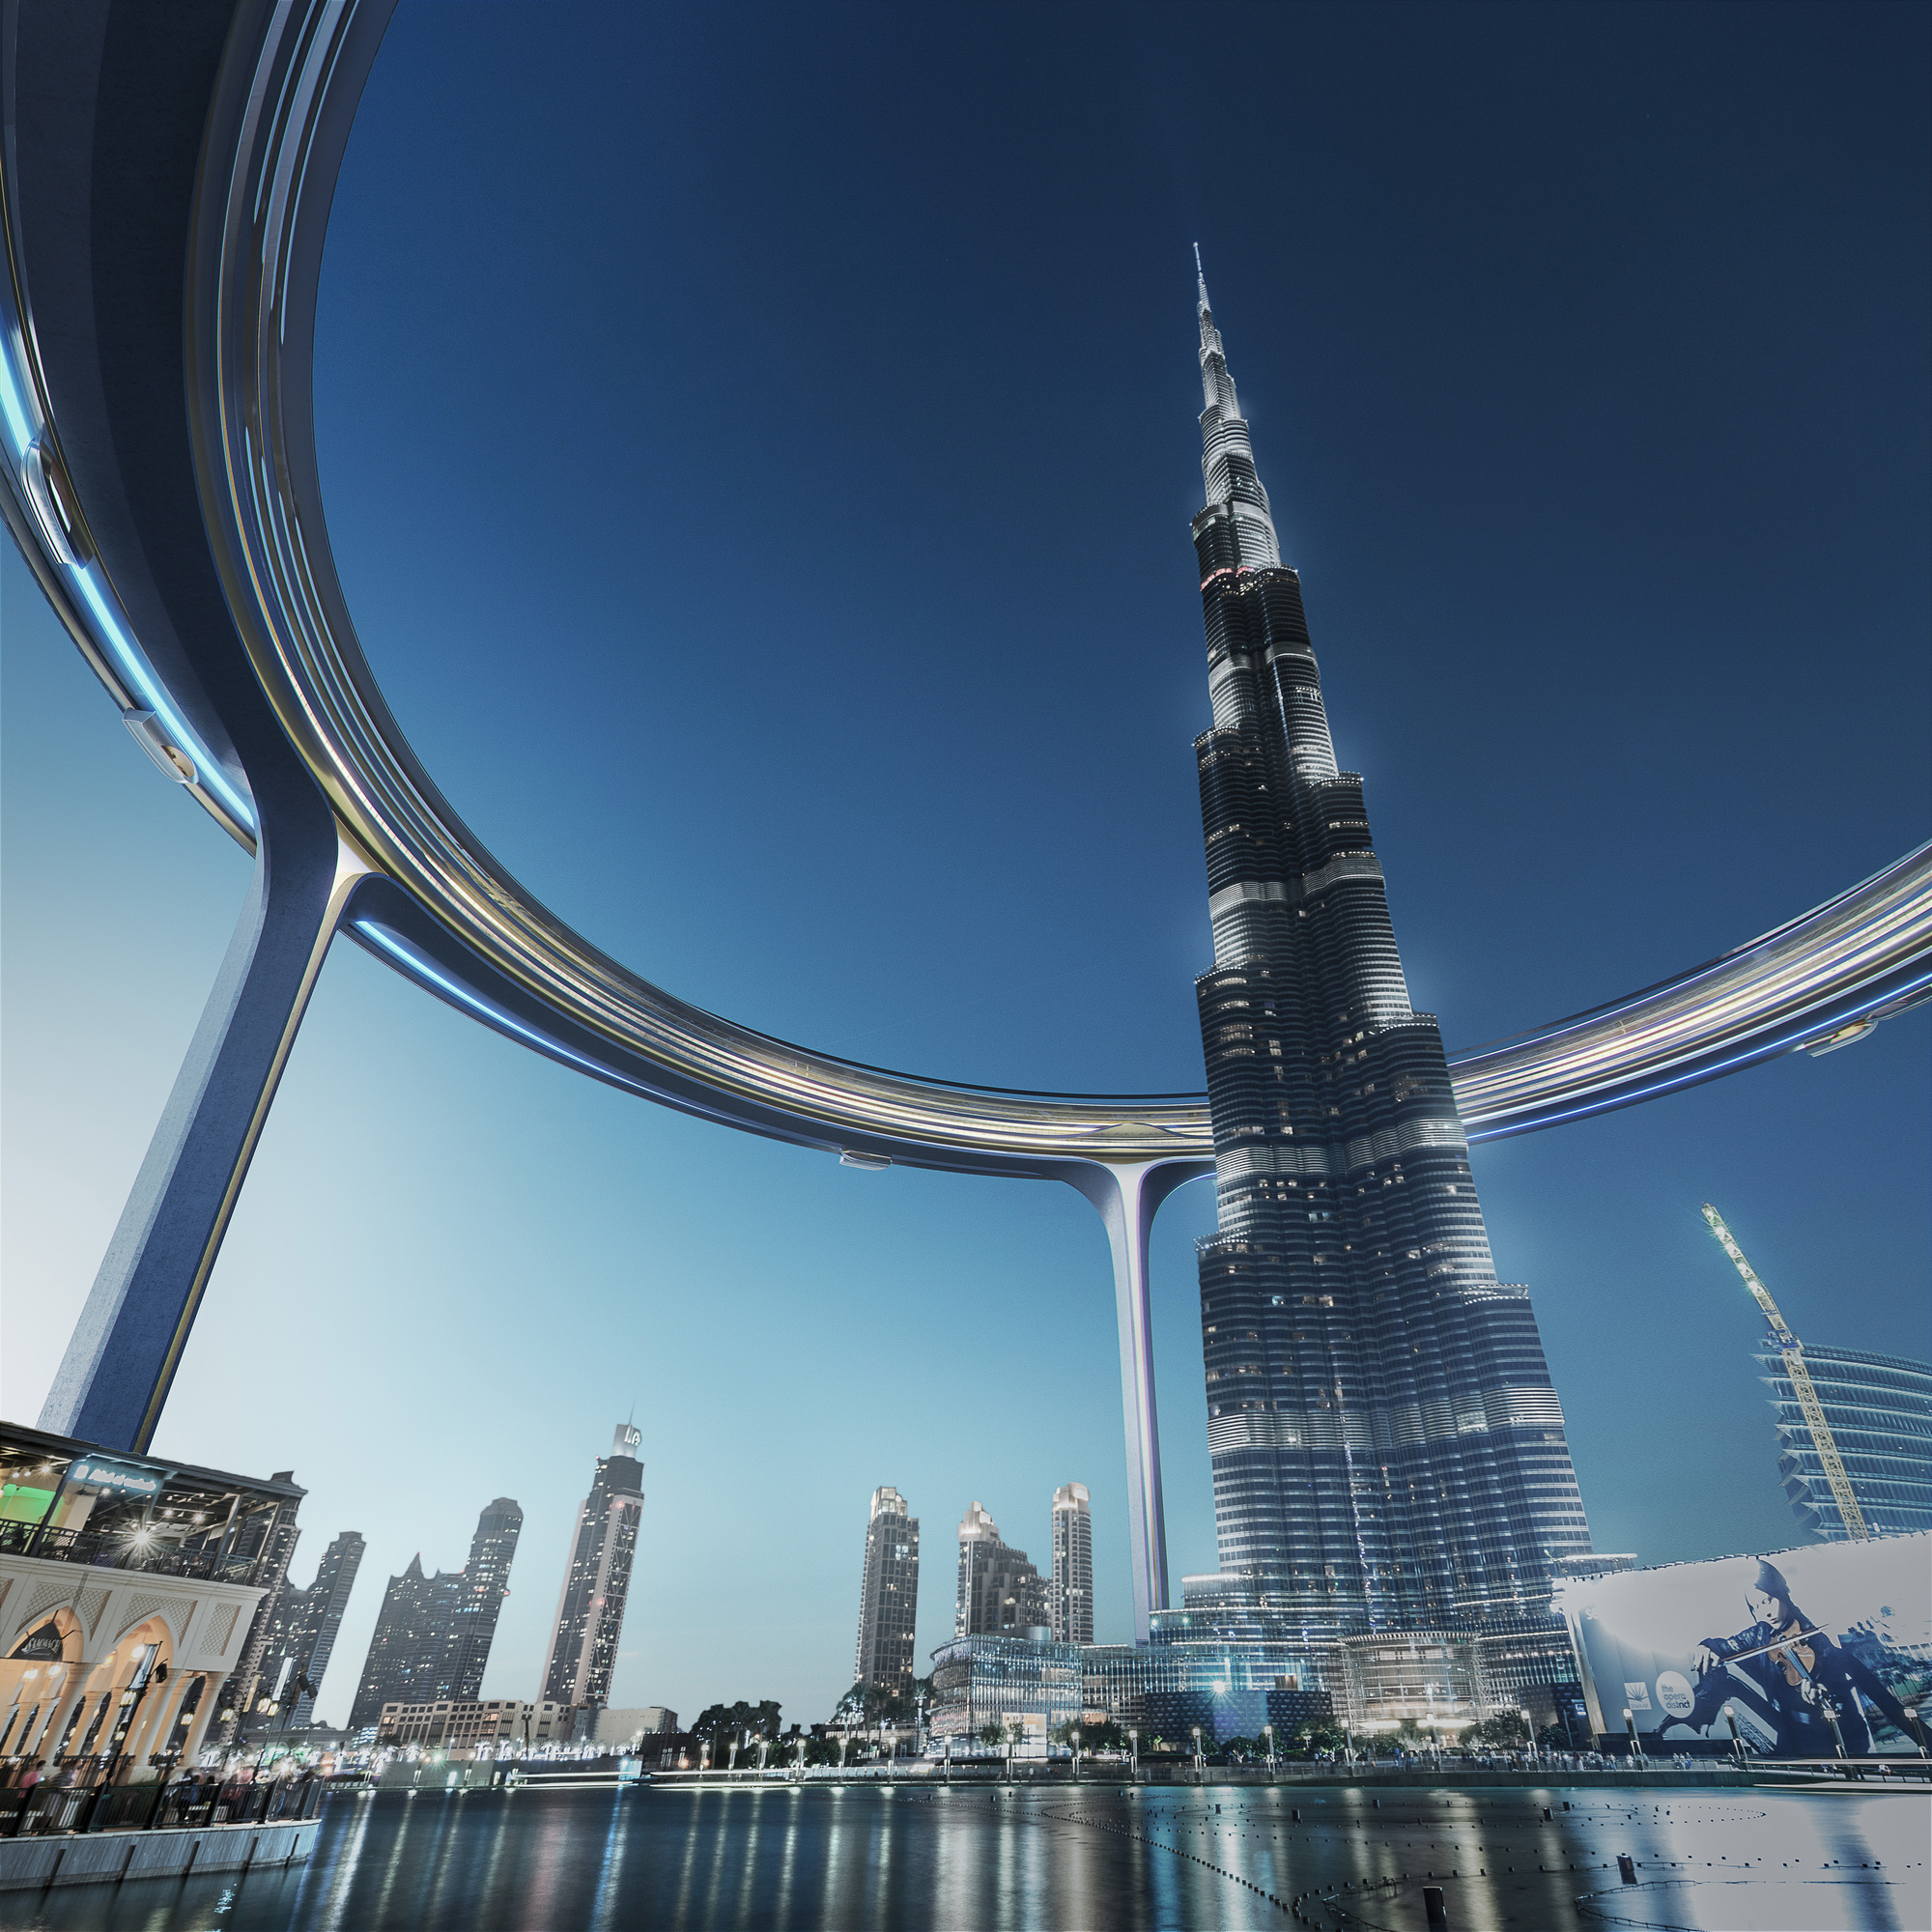 Downtown Circle - A Giant Ring-Like Structure Is Proposed To Encircle Dubai's Burj Khalifa